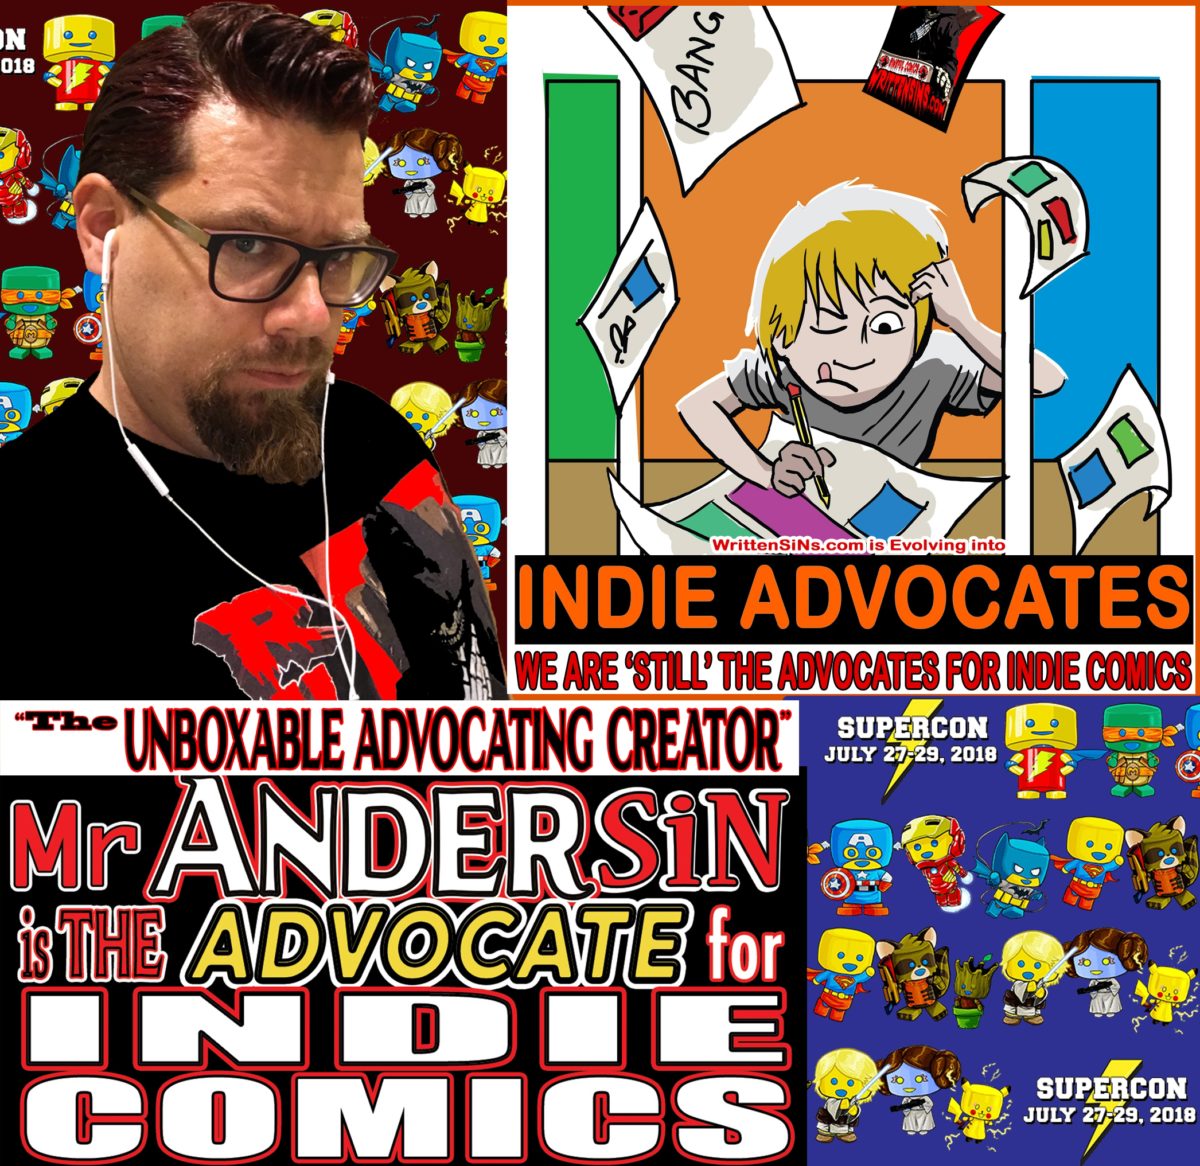 COMIC CON HIGHWAY EXITING with INDIE ADVOCATING  in SOUTH NORTH:: -NC- Mr ANDERSIN SUPERCHARGES the INDIE ADVOCATING in   Raleigh Supercon is July 27-29  .  .